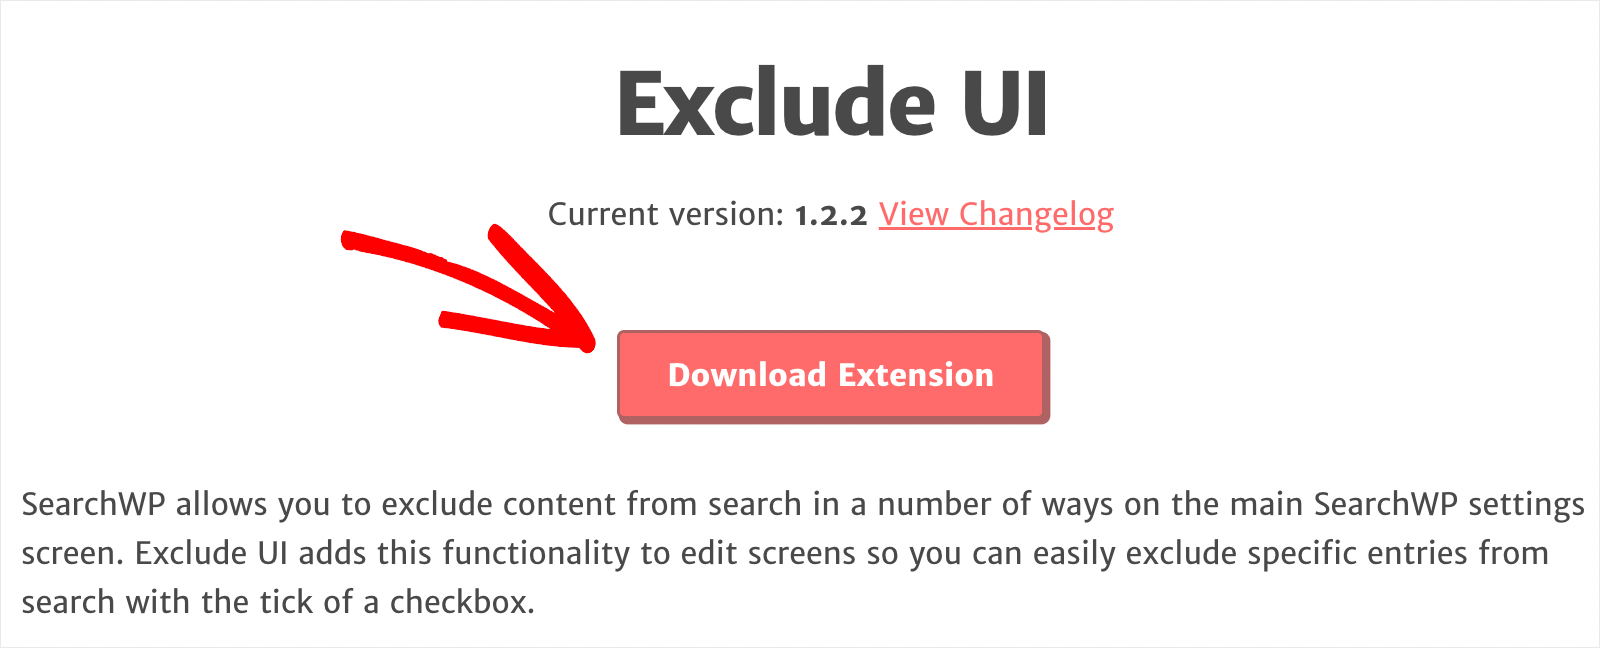 press Download Extension